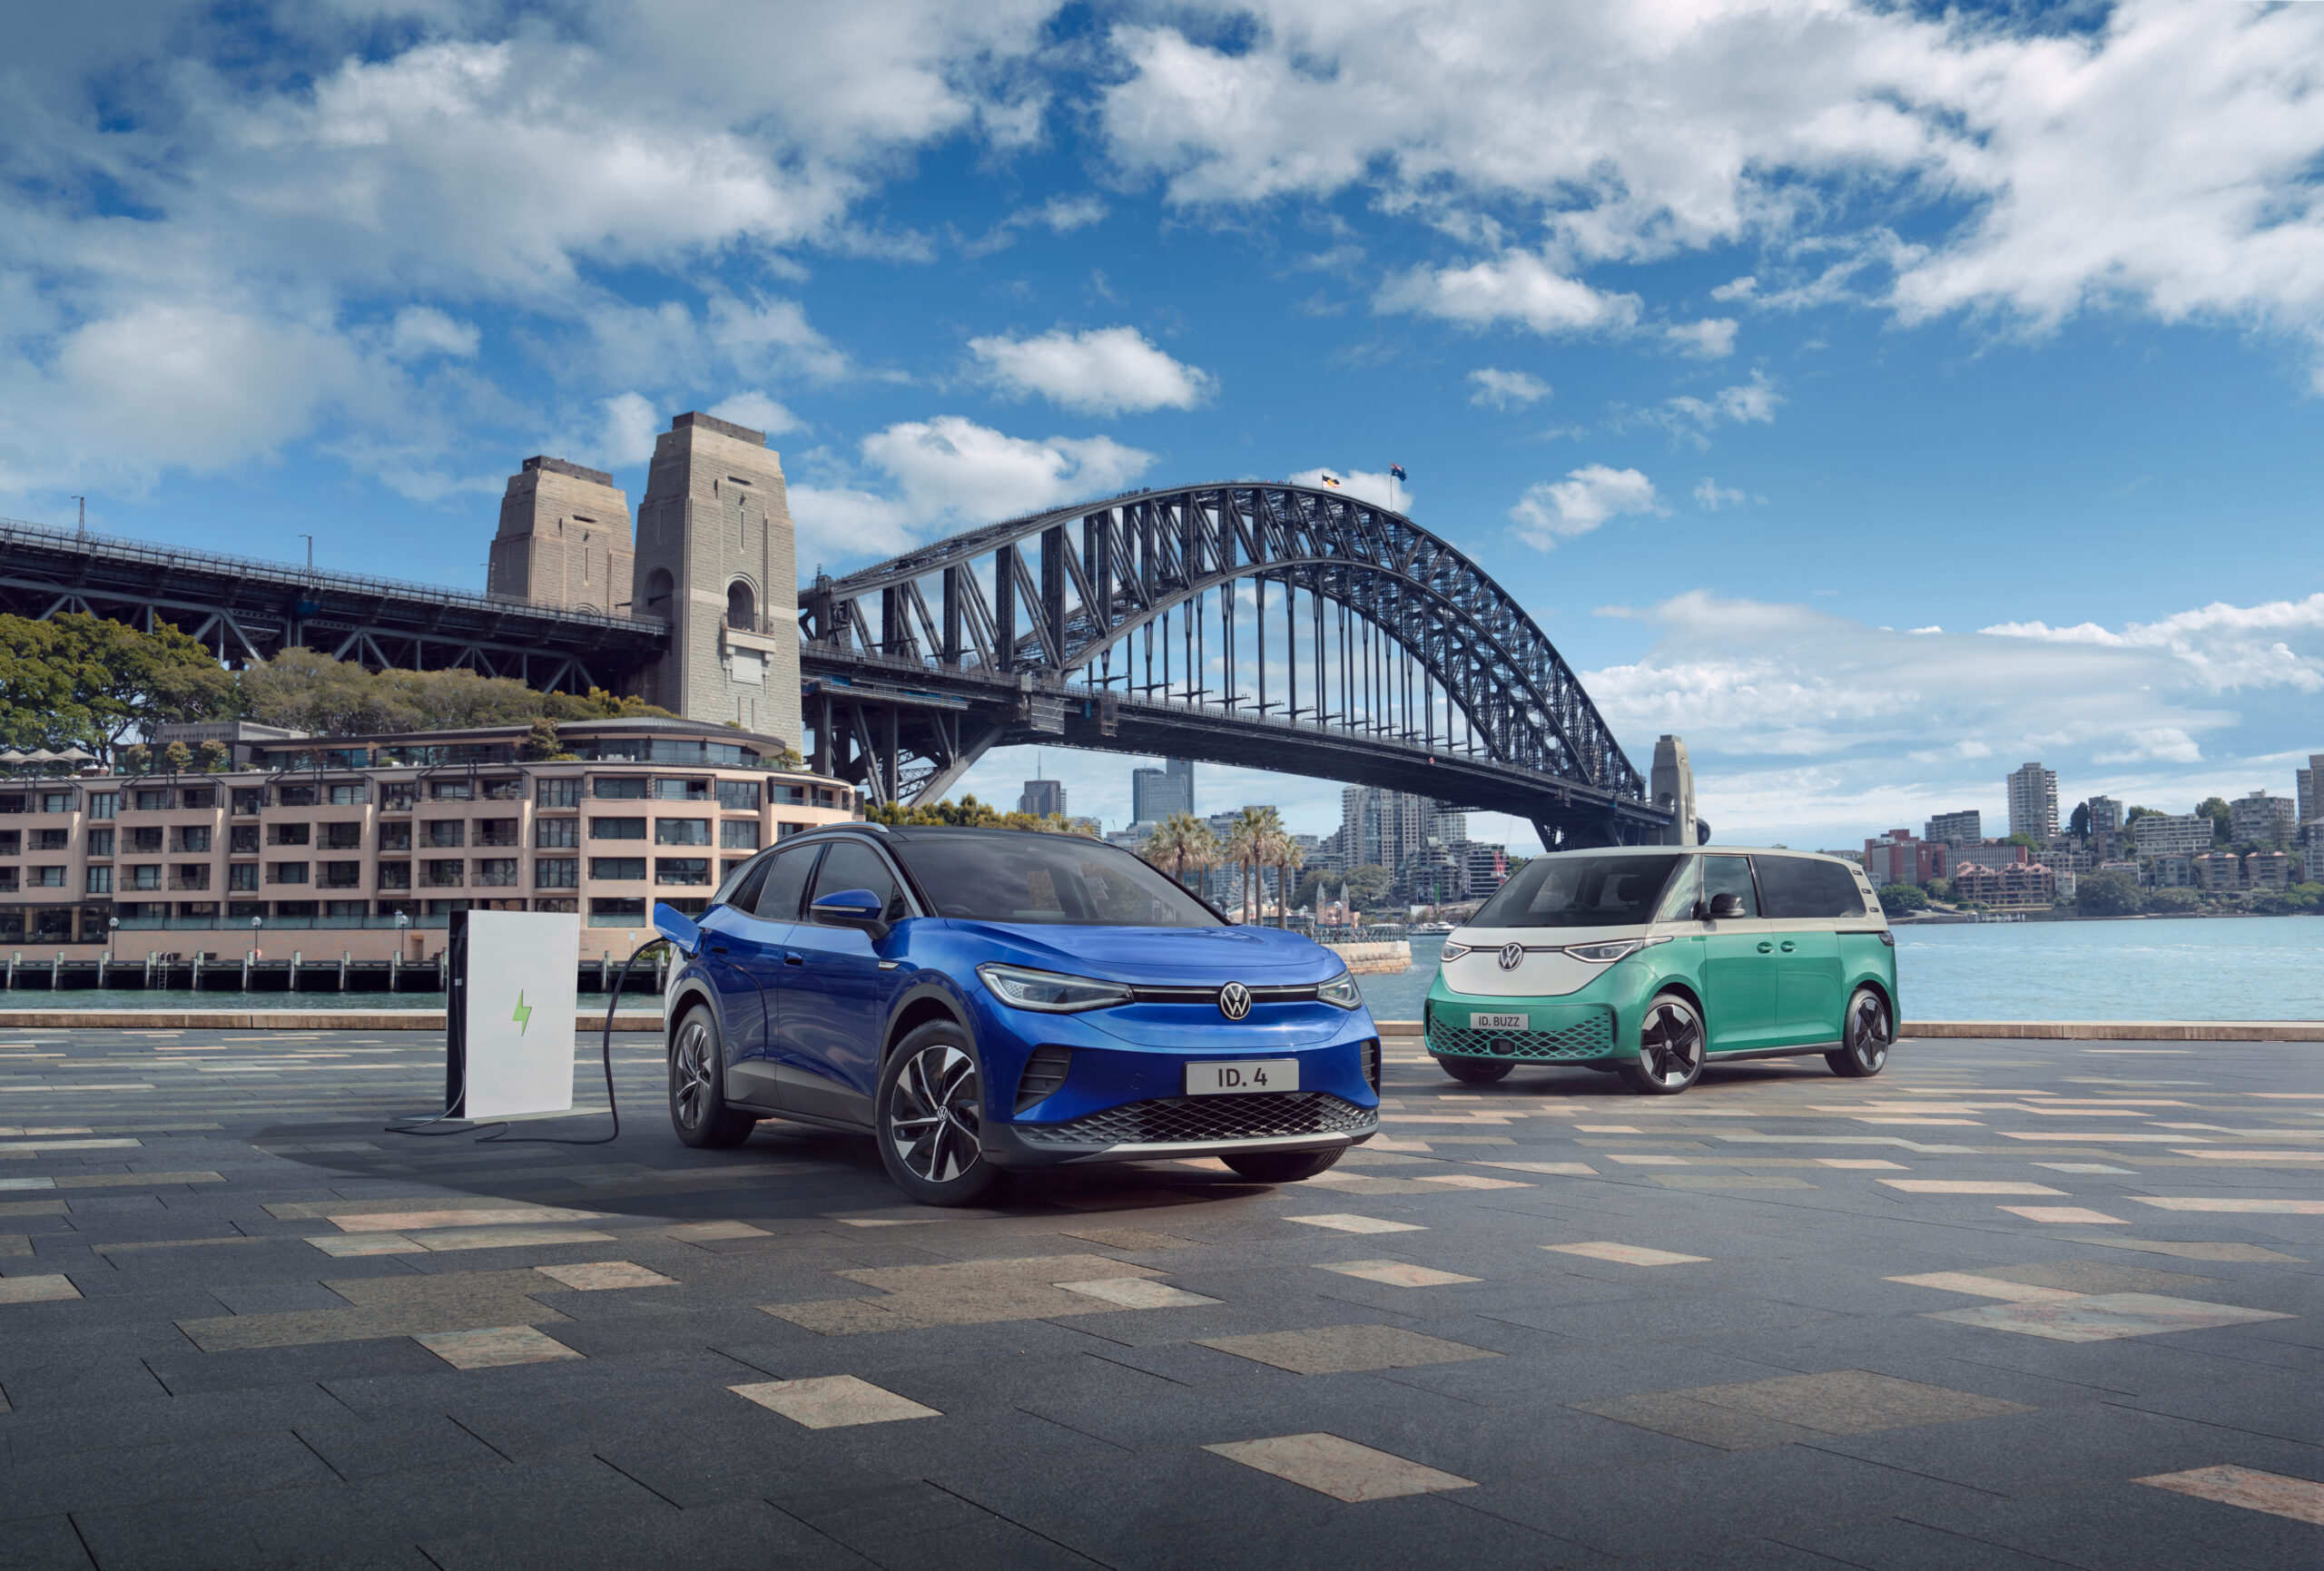 Five EVs before 2025 – Volkswagen confirms ID.3, ID.4, ID.5, ID.Buzz and ID.Buzz Cargo